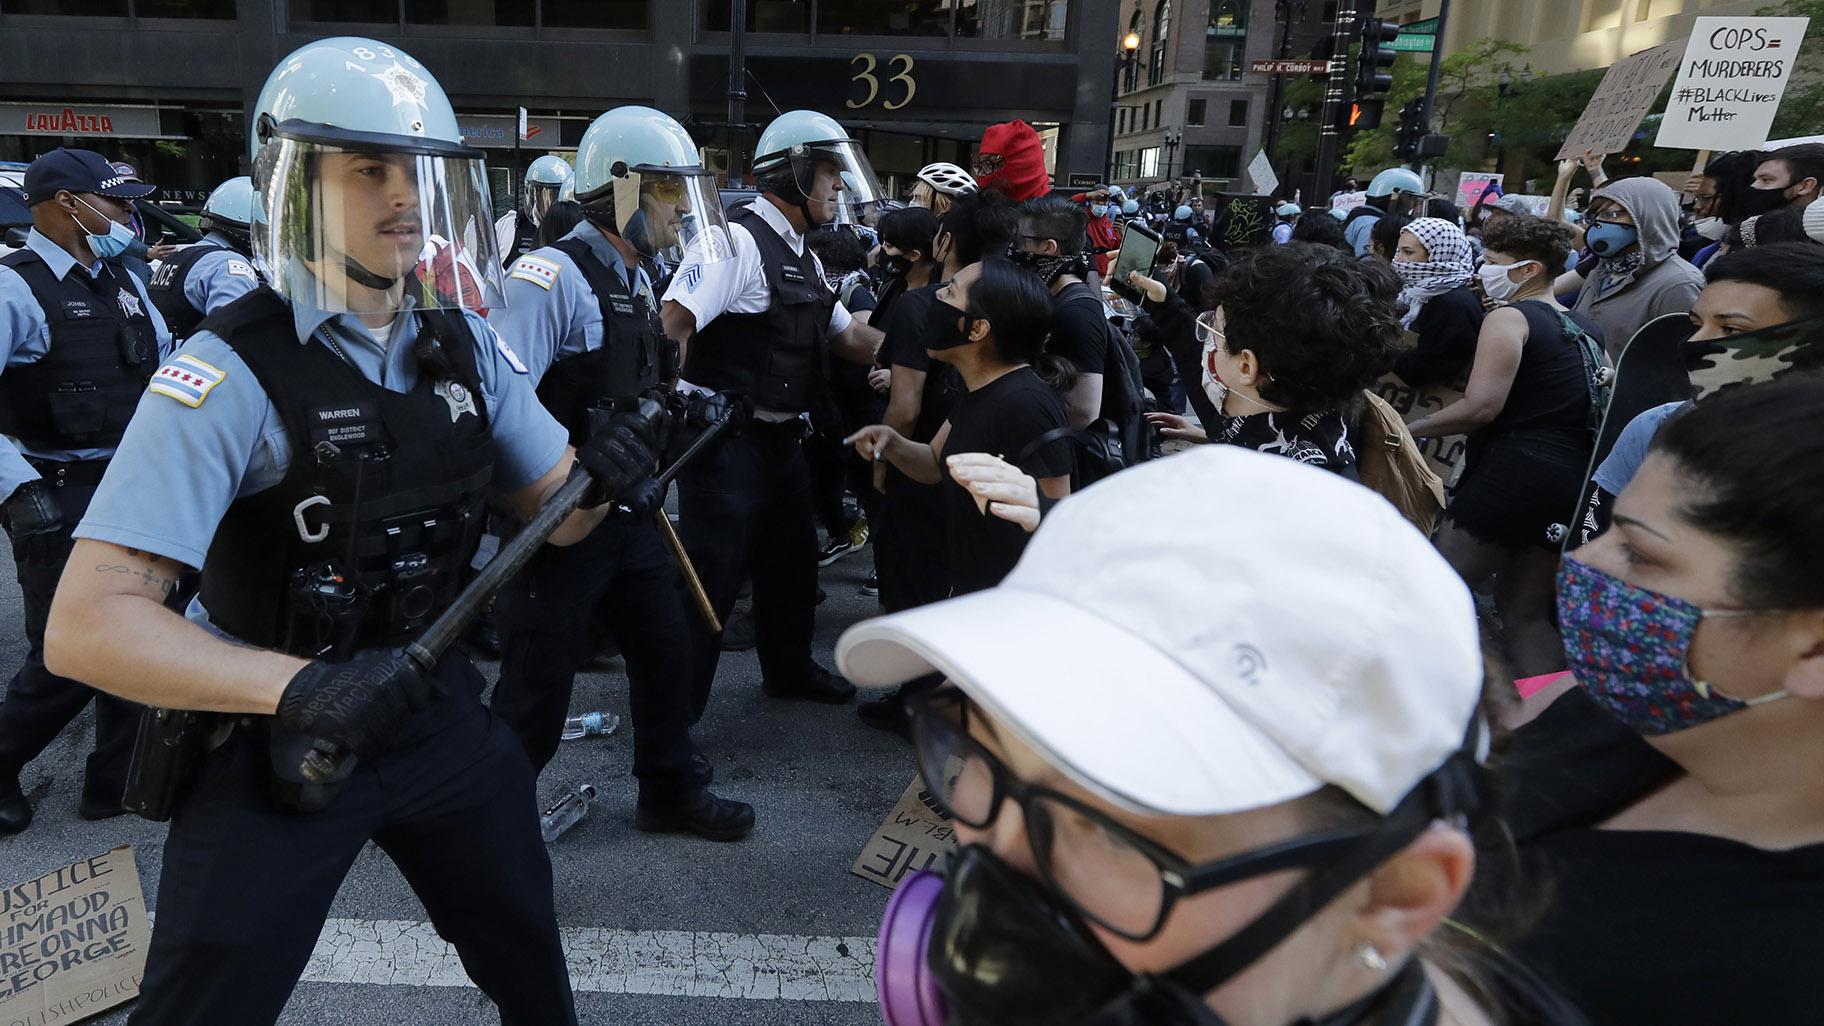 Chicago Police officers and protesters clash during a protest over the death of George Floyd in Chicago, Saturday, May 30, 2020. Floyd died after being taken into custody and restrained by Minneapolis police on Memorial Day in Minnesota. (AP Photo / Nam Y. Huh)